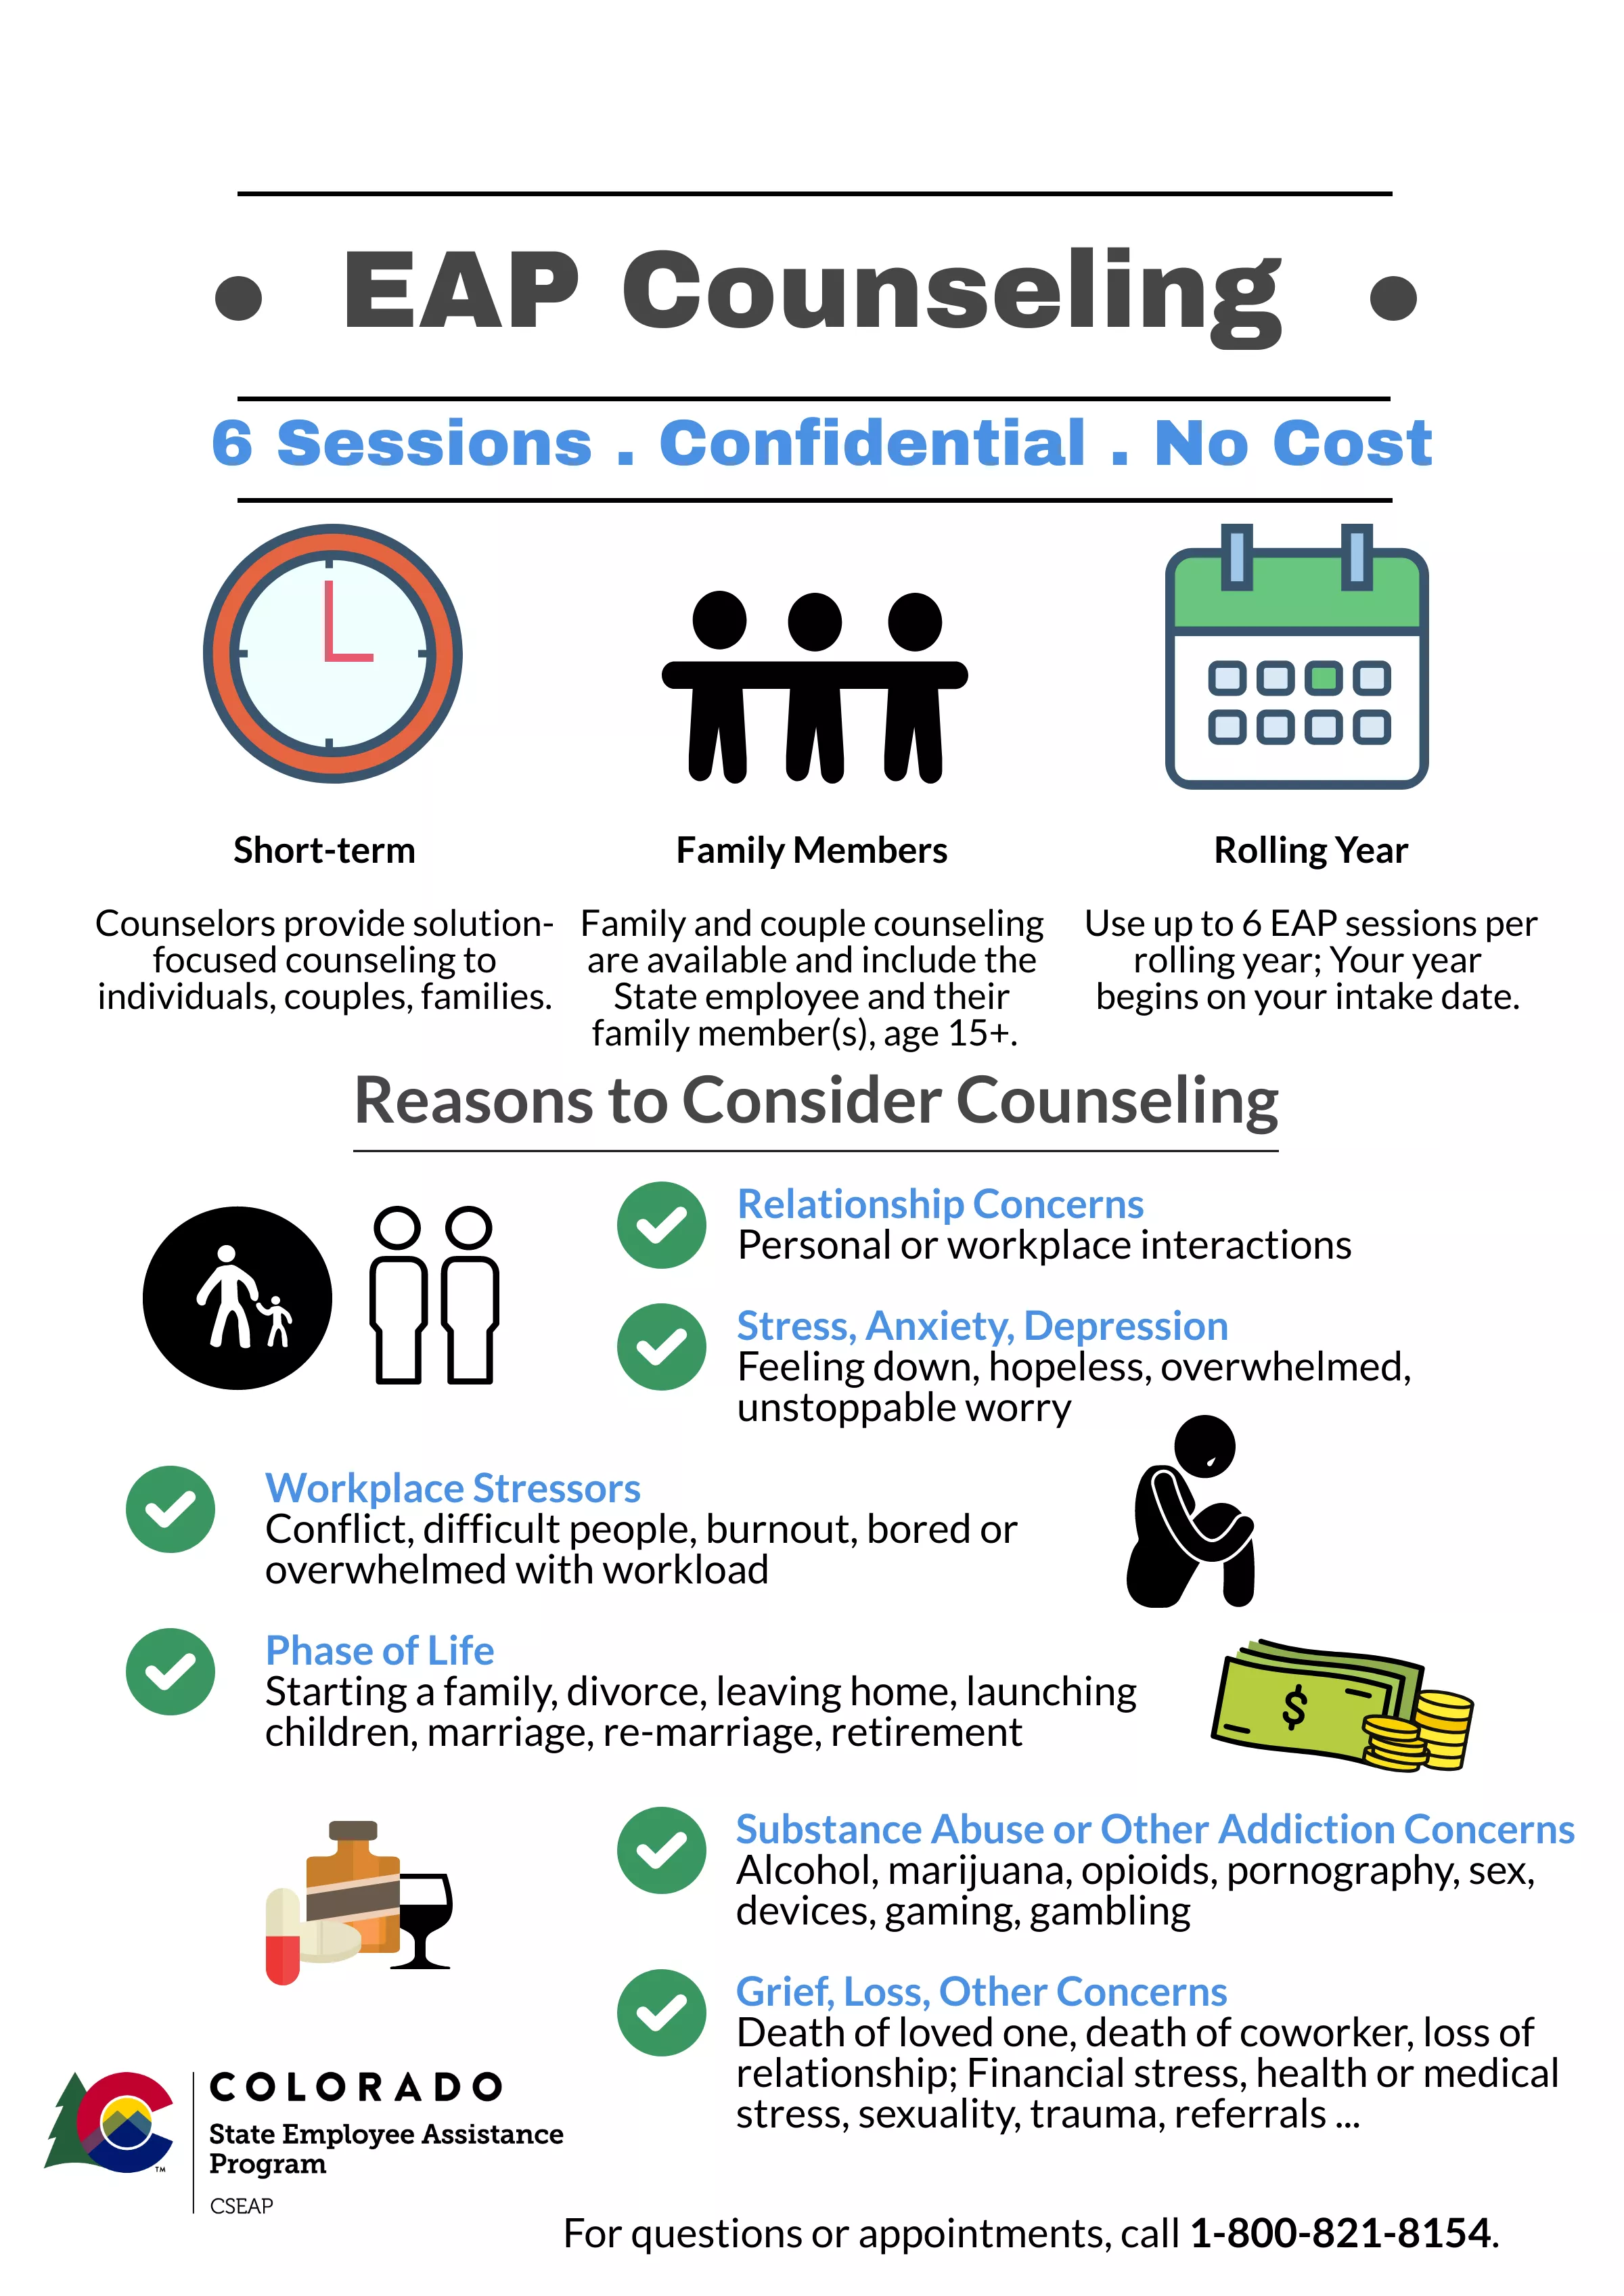 EAP Counseling infographic